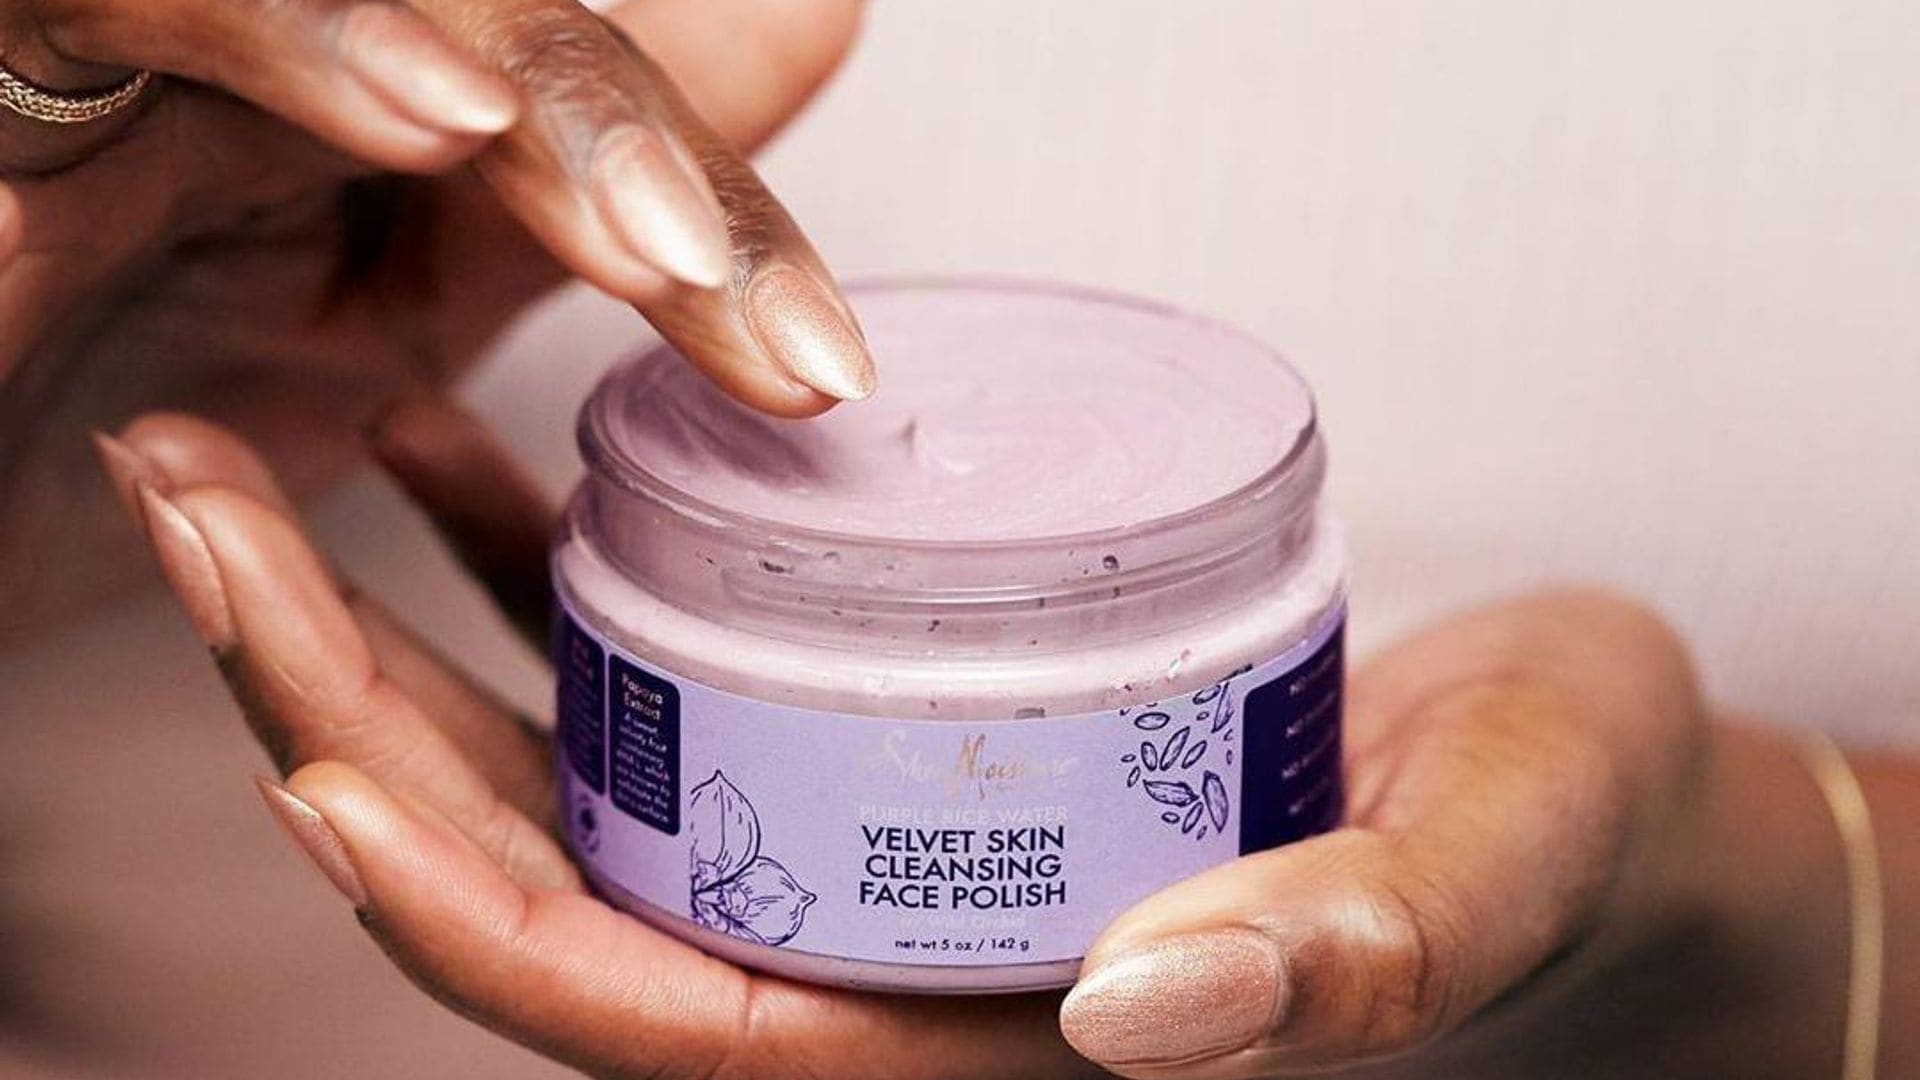 20 beauty brands pledging to support the African-American community